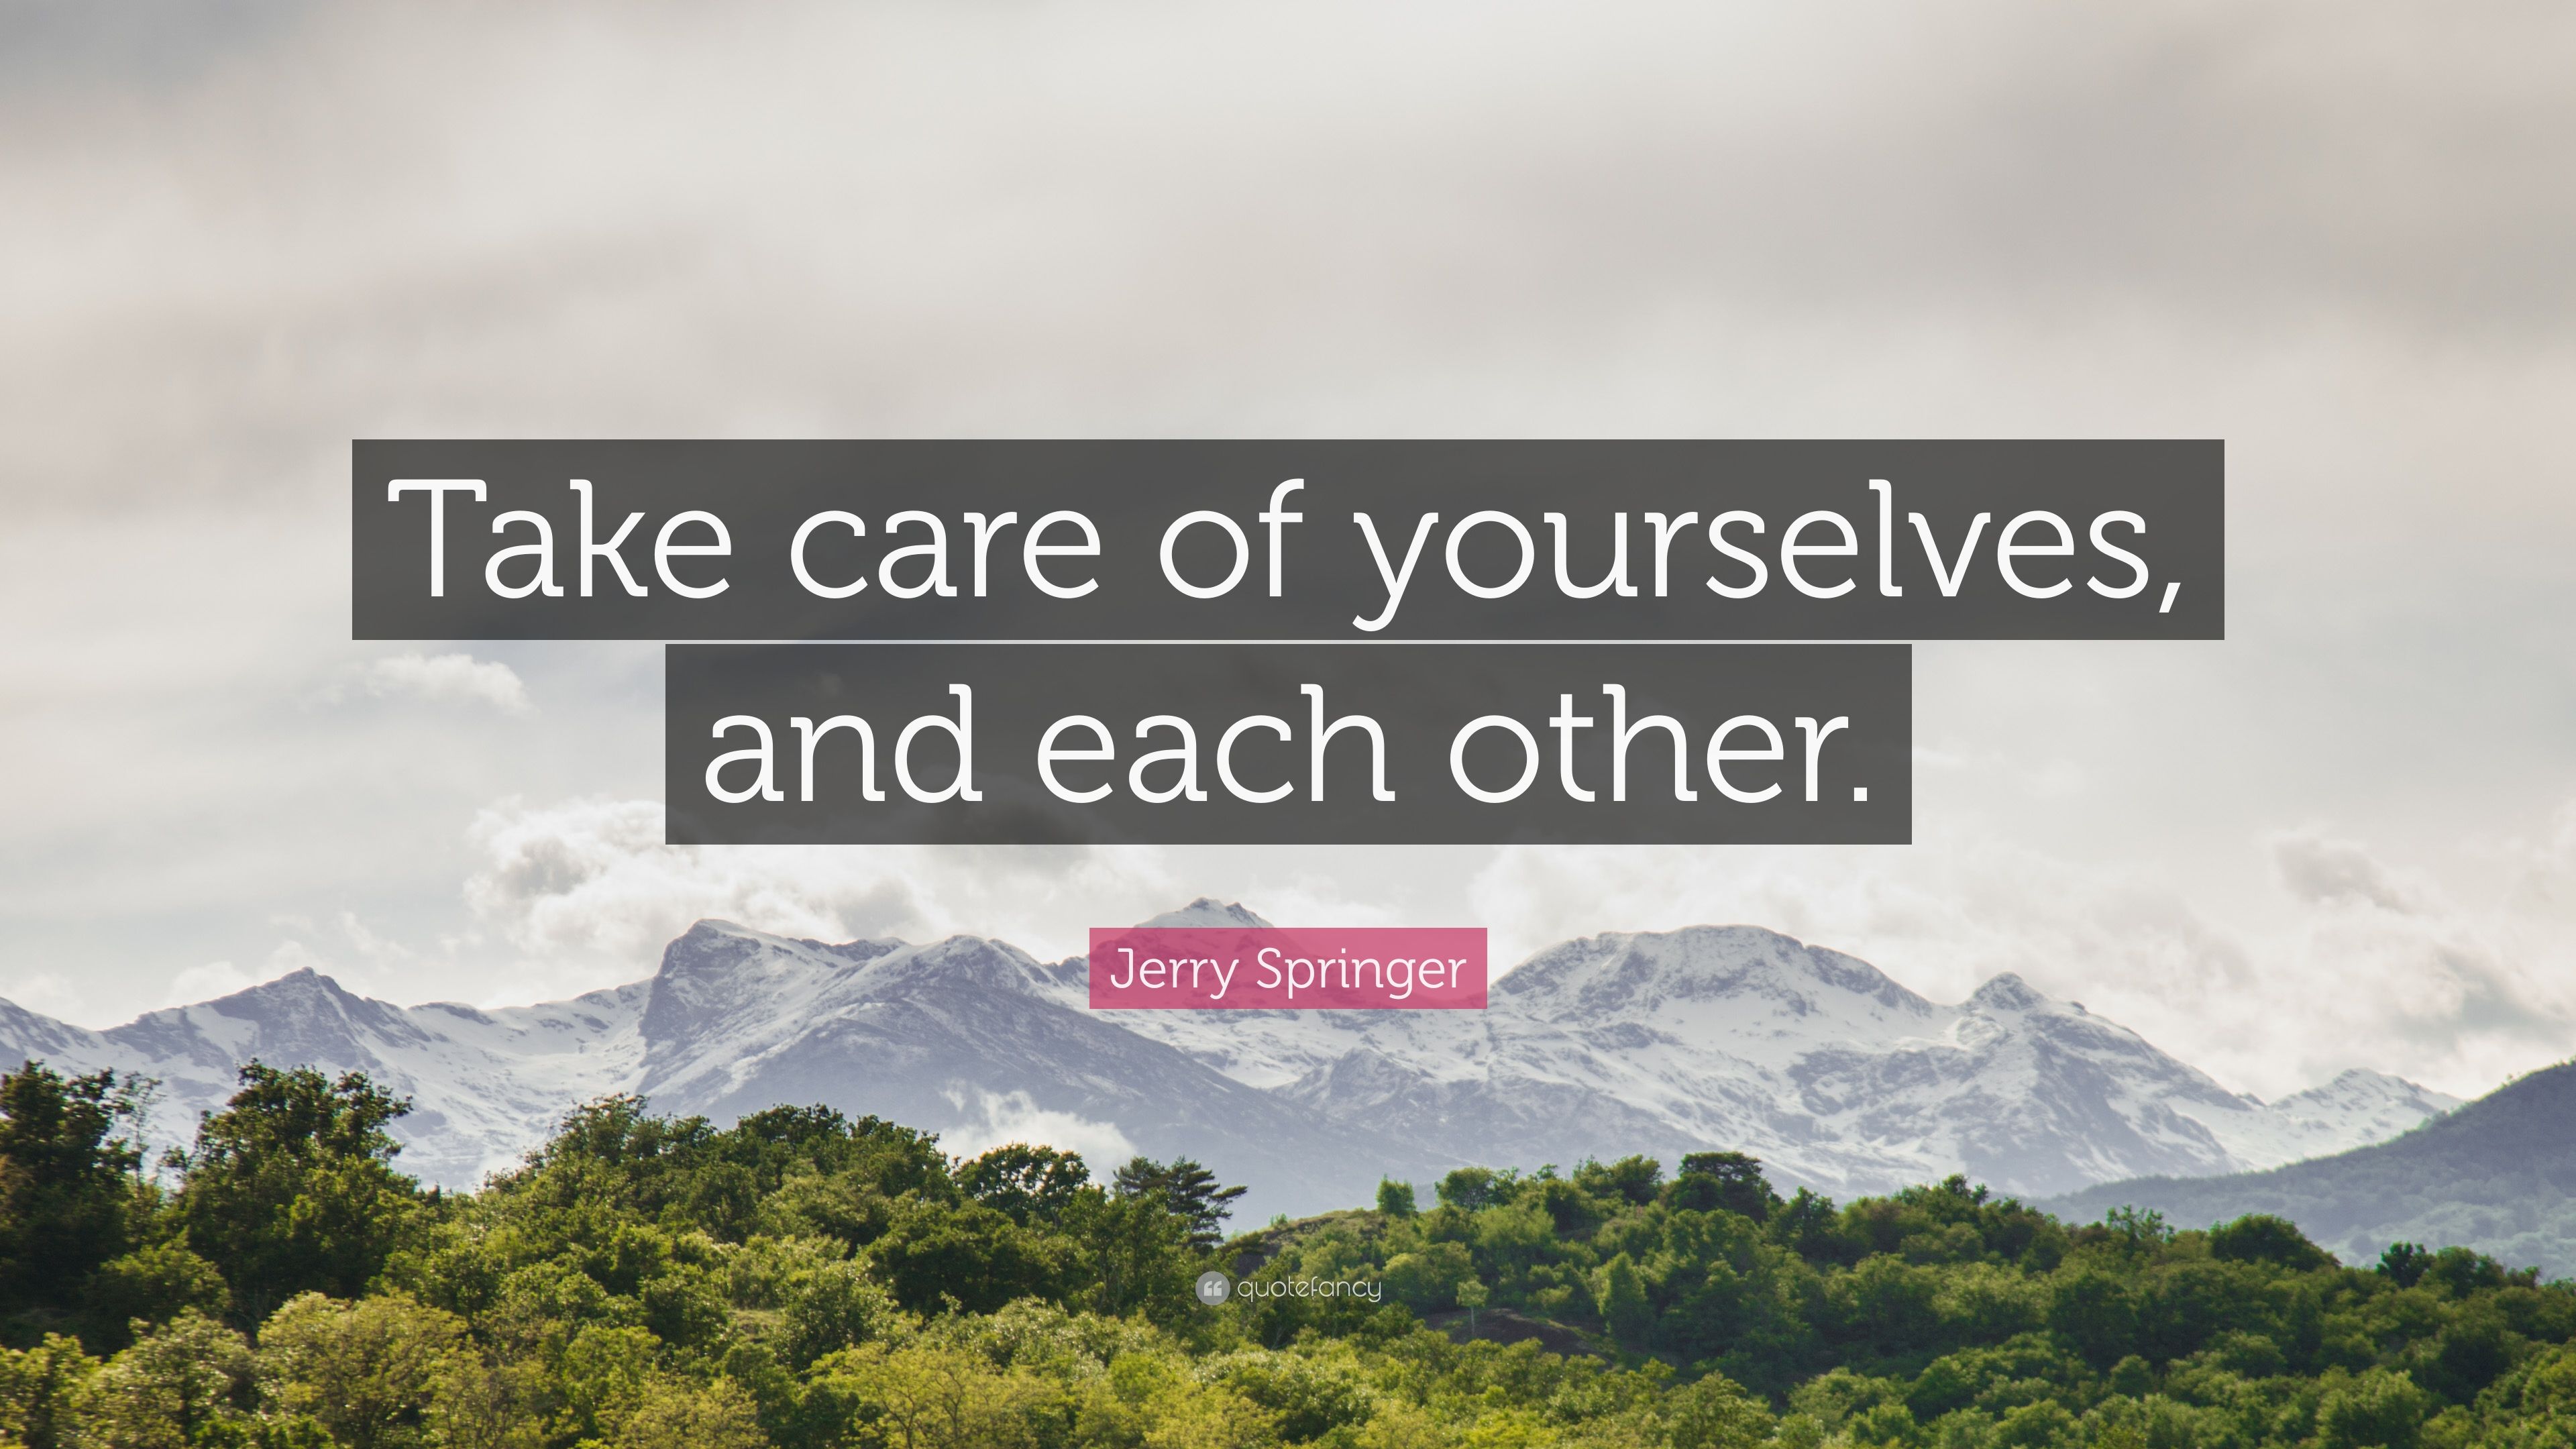 Jerry Springer Quote: “Take care of yourselves, and each other